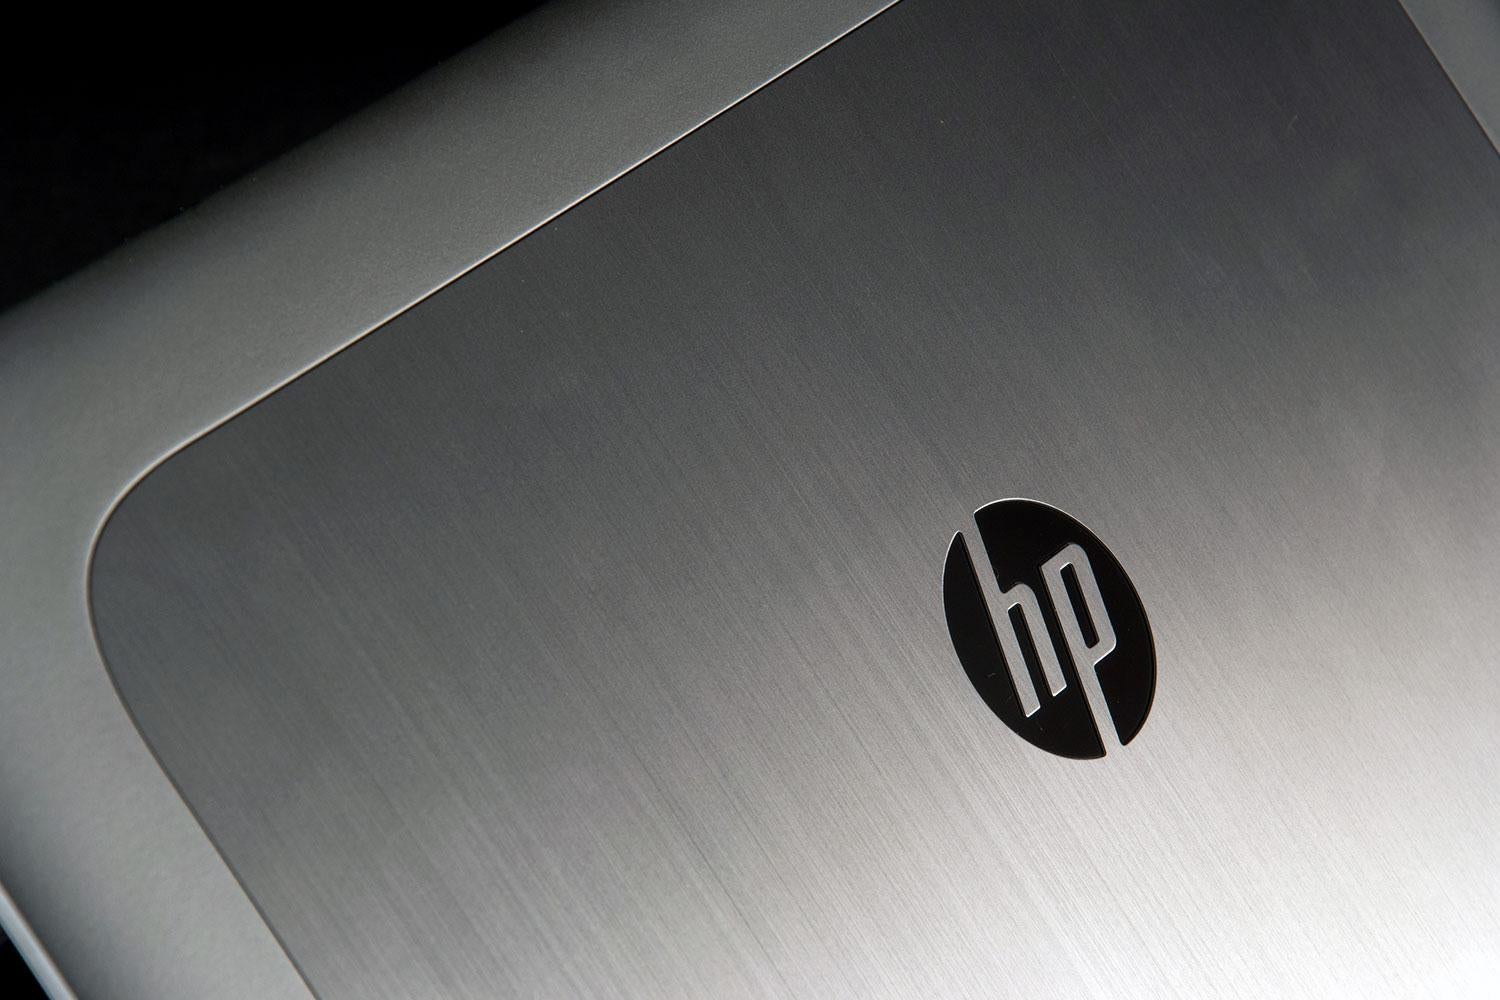 Reinventing Inc: Looking at HP's first year in business